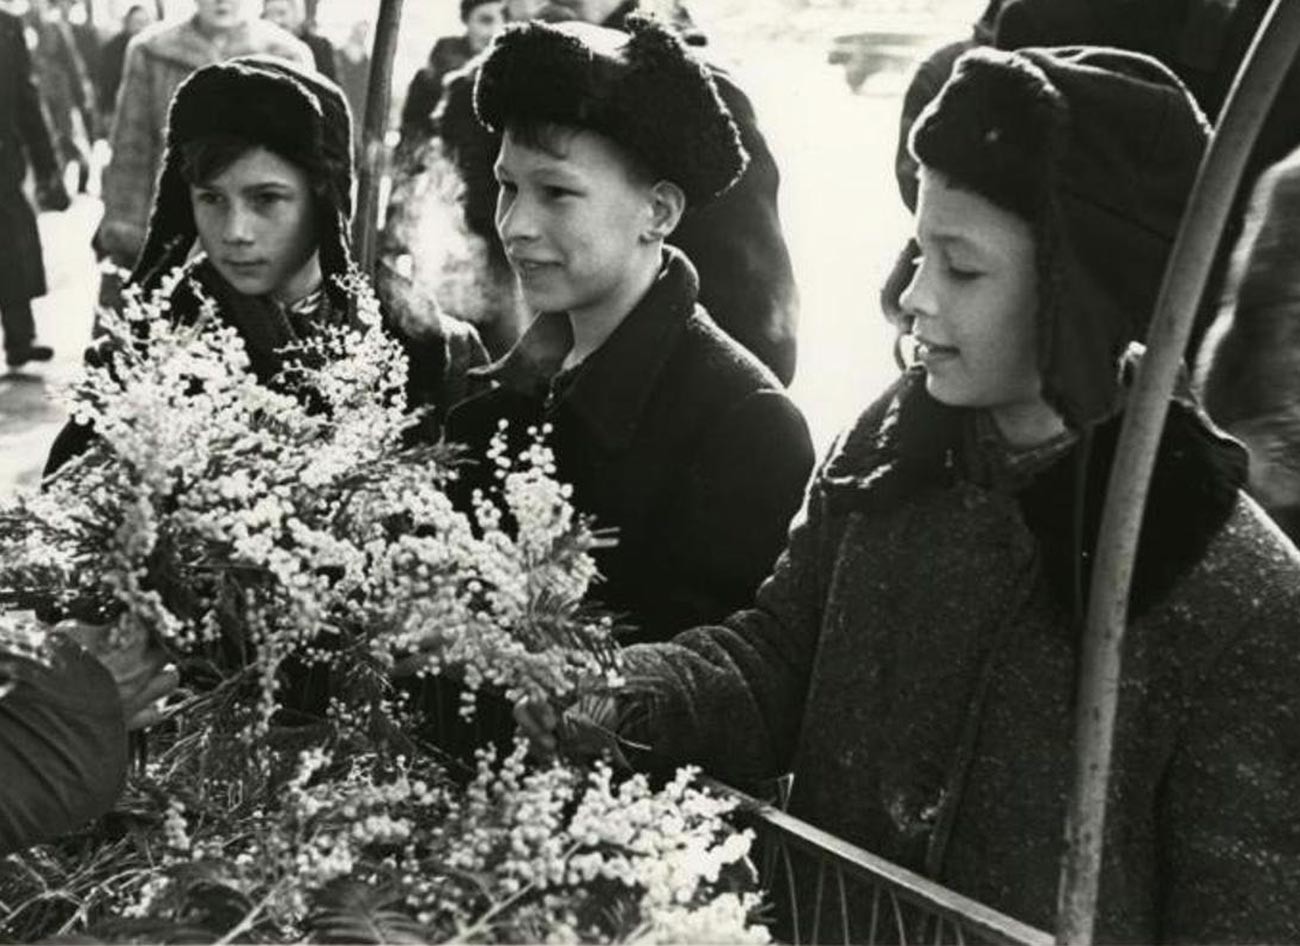 Boys buy mimosa for International Women Day on March 8, 1959 